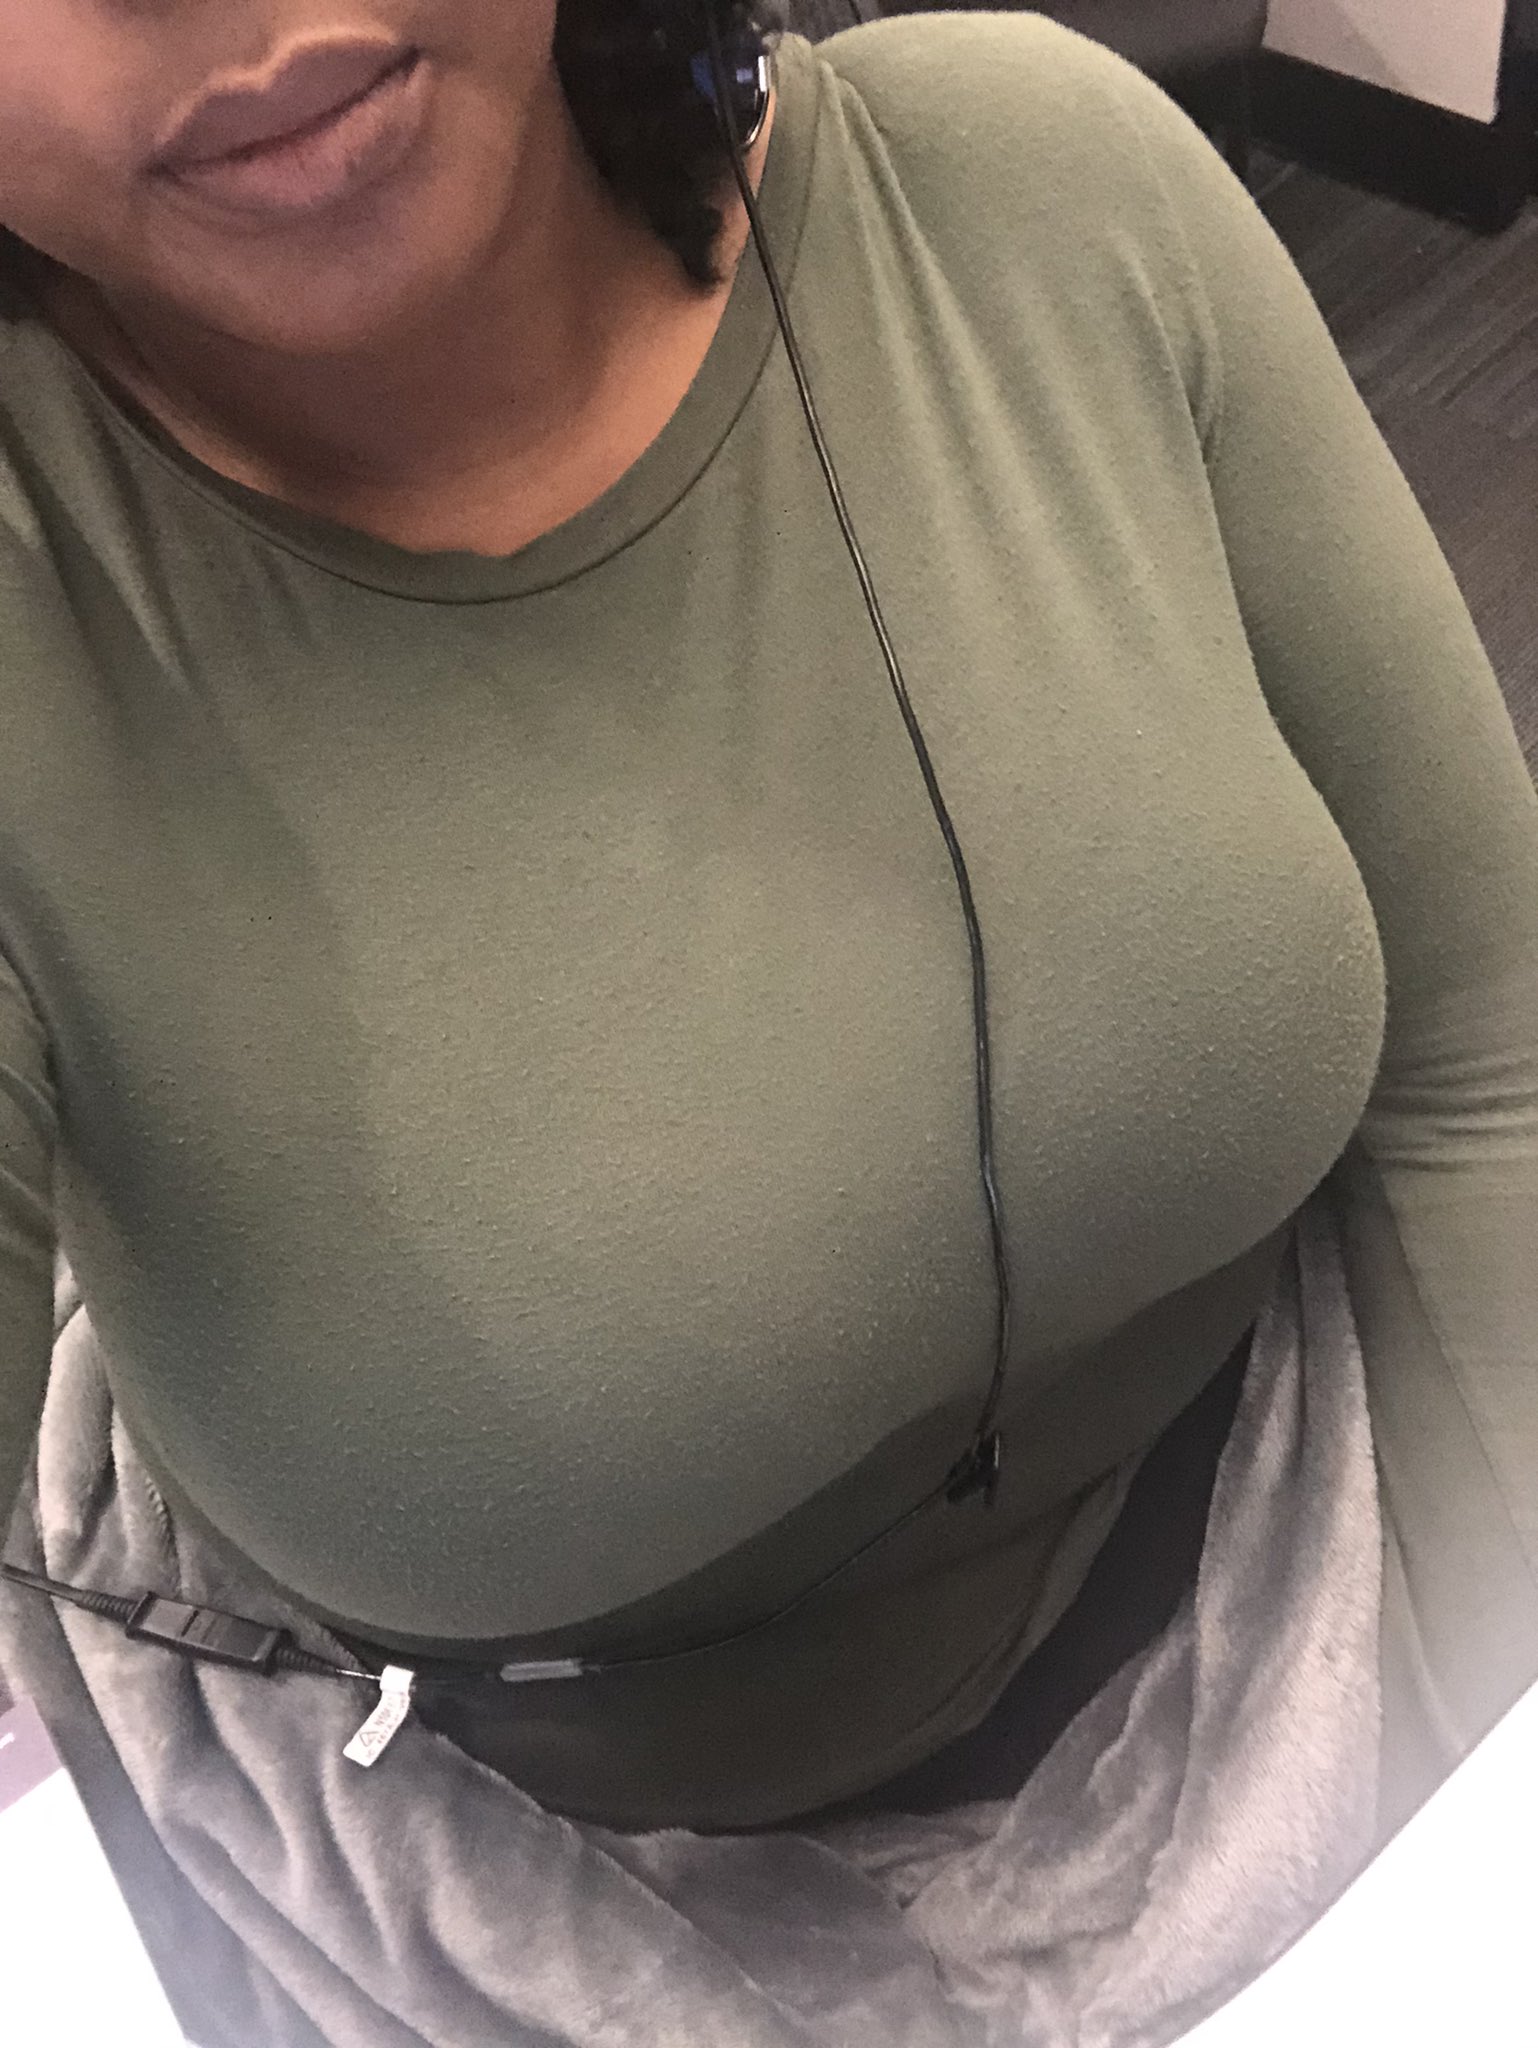 wanderlust on X: For reference, a picture of my shirt today. Older white  woman coworker called herself being nice and warning me about showing too  much cleavage. Where is the cleavage? I